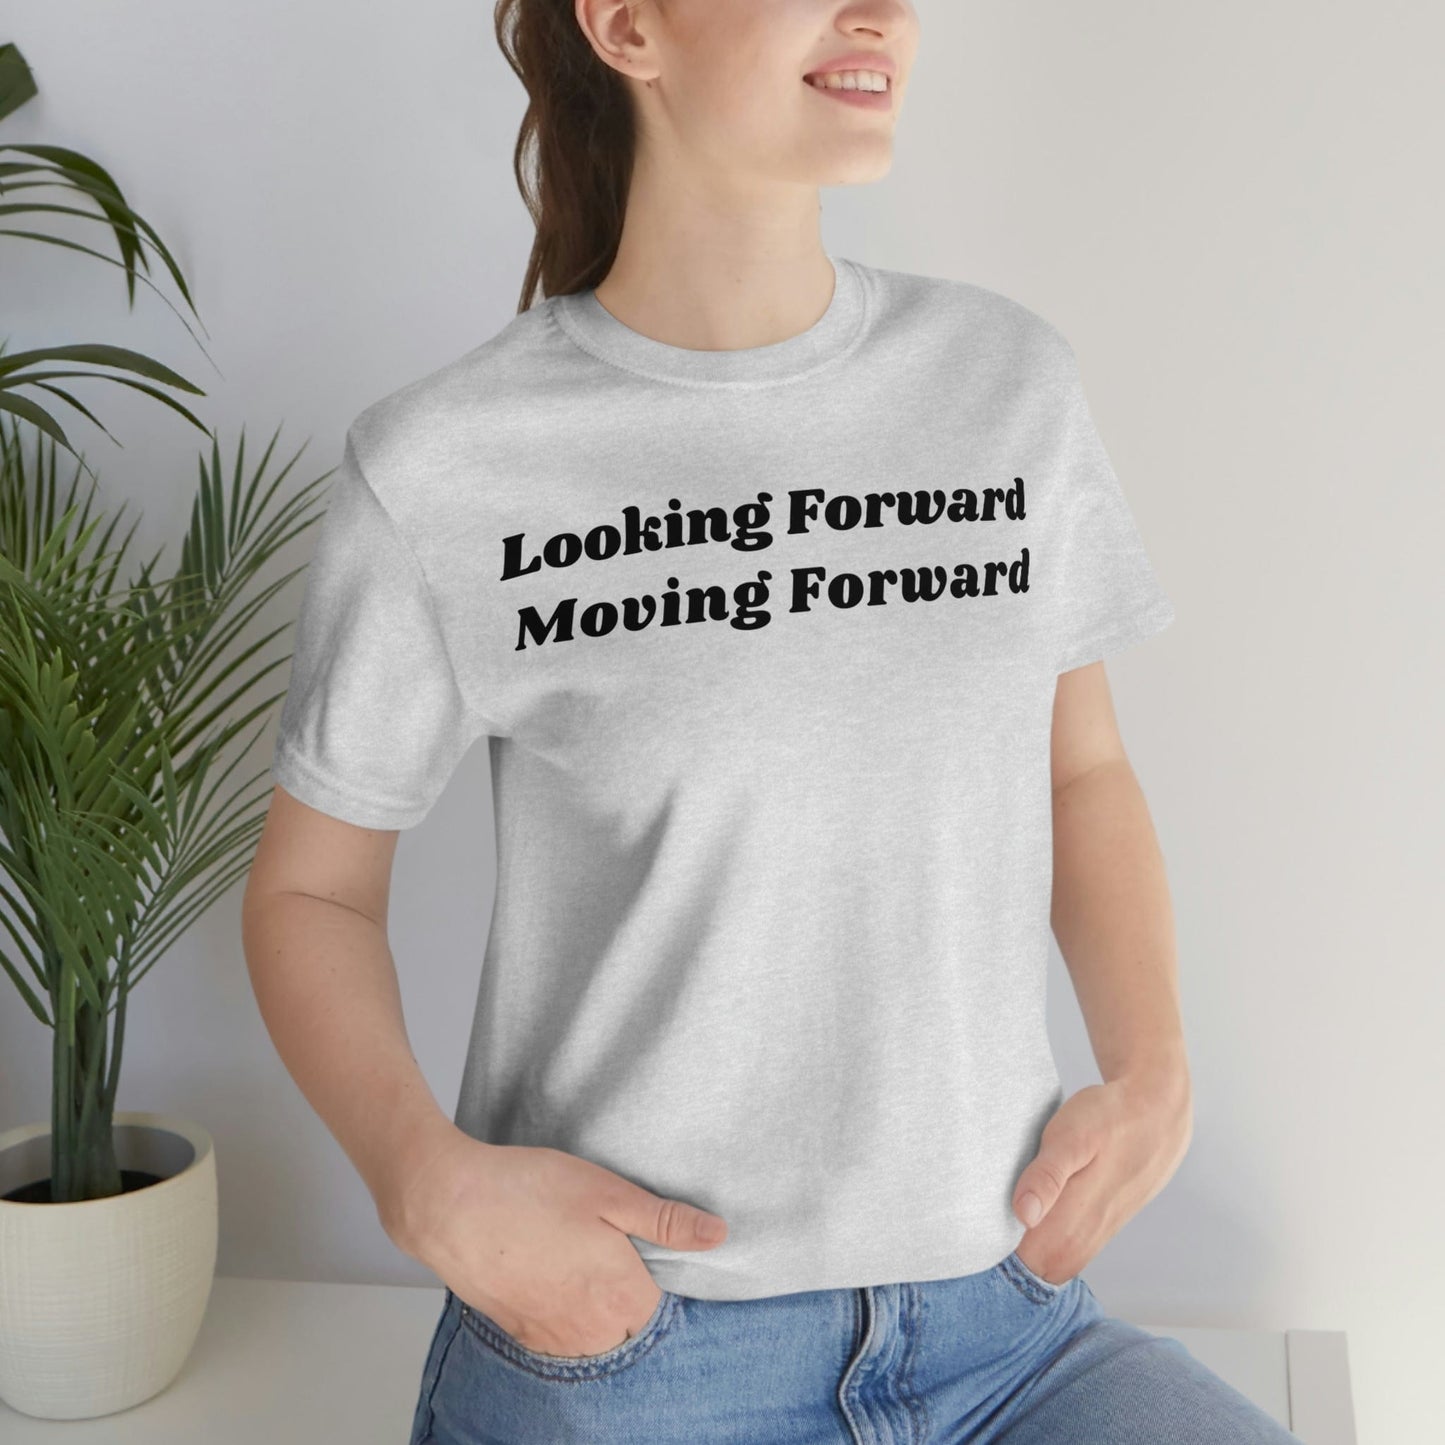 Looking Forward, Moving  Forward (Graphic Black Text) Unisex Jersey Short Sleeve Tee - Style: Bella+Canvas 3001